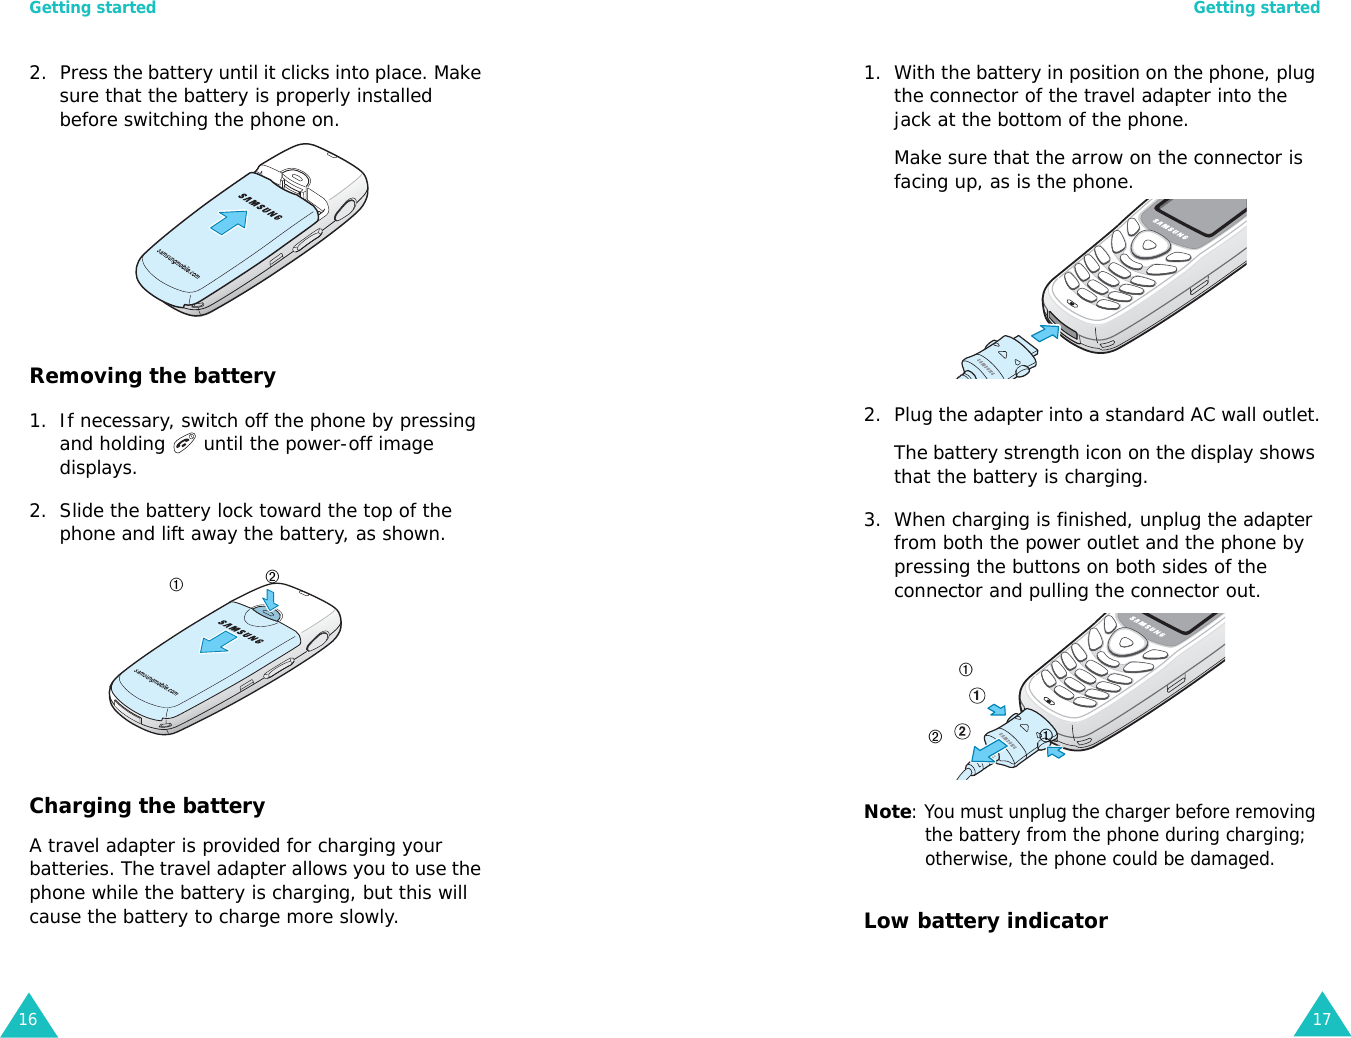 Getting started162. Press the battery until it clicks into place. Make sure that the battery is properly installed before switching the phone on.Removing the battery1. If necessary, switch off the phone by pressing and holding   until the power-off image displays.2. Slide the battery lock toward the top of the phone and lift away the battery, as shown.Charging the batteryA travel adapter is provided for charging your batteries. The travel adapter allows you to use the phone while the battery is charging, but this will cause the battery to charge more slowly.➀➁Getting started171. With the battery in position on the phone, plug the connector of the travel adapter into the jack at the bottom of the phone.Make sure that the arrow on the connector is facing up, as is the phone.2. Plug the adapter into a standard AC wall outlet.The battery strength icon on the display shows that the battery is charging.3. When charging is finished, unplug the adapter from both the power outlet and the phone by pressing the buttons on both sides of the connector and pulling the connector out.Note: You must unplug the charger before removing the battery from the phone during charging; otherwise, the phone could be damaged. Low battery indicator➀➀➁